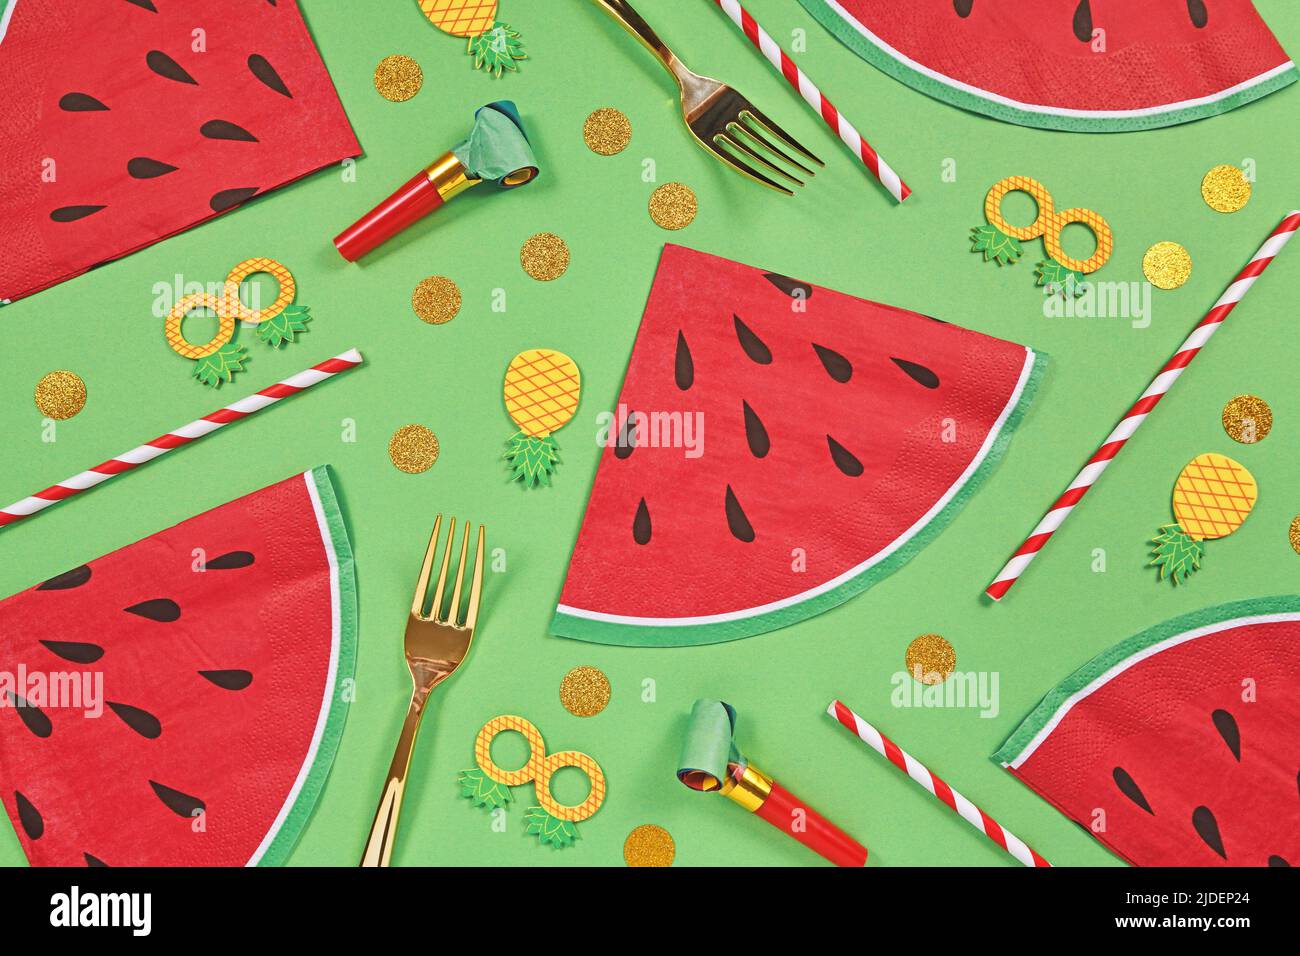 Summer party flat lay with watermelon shaped napkins, drinking straws and confetti on green background Stock Photo